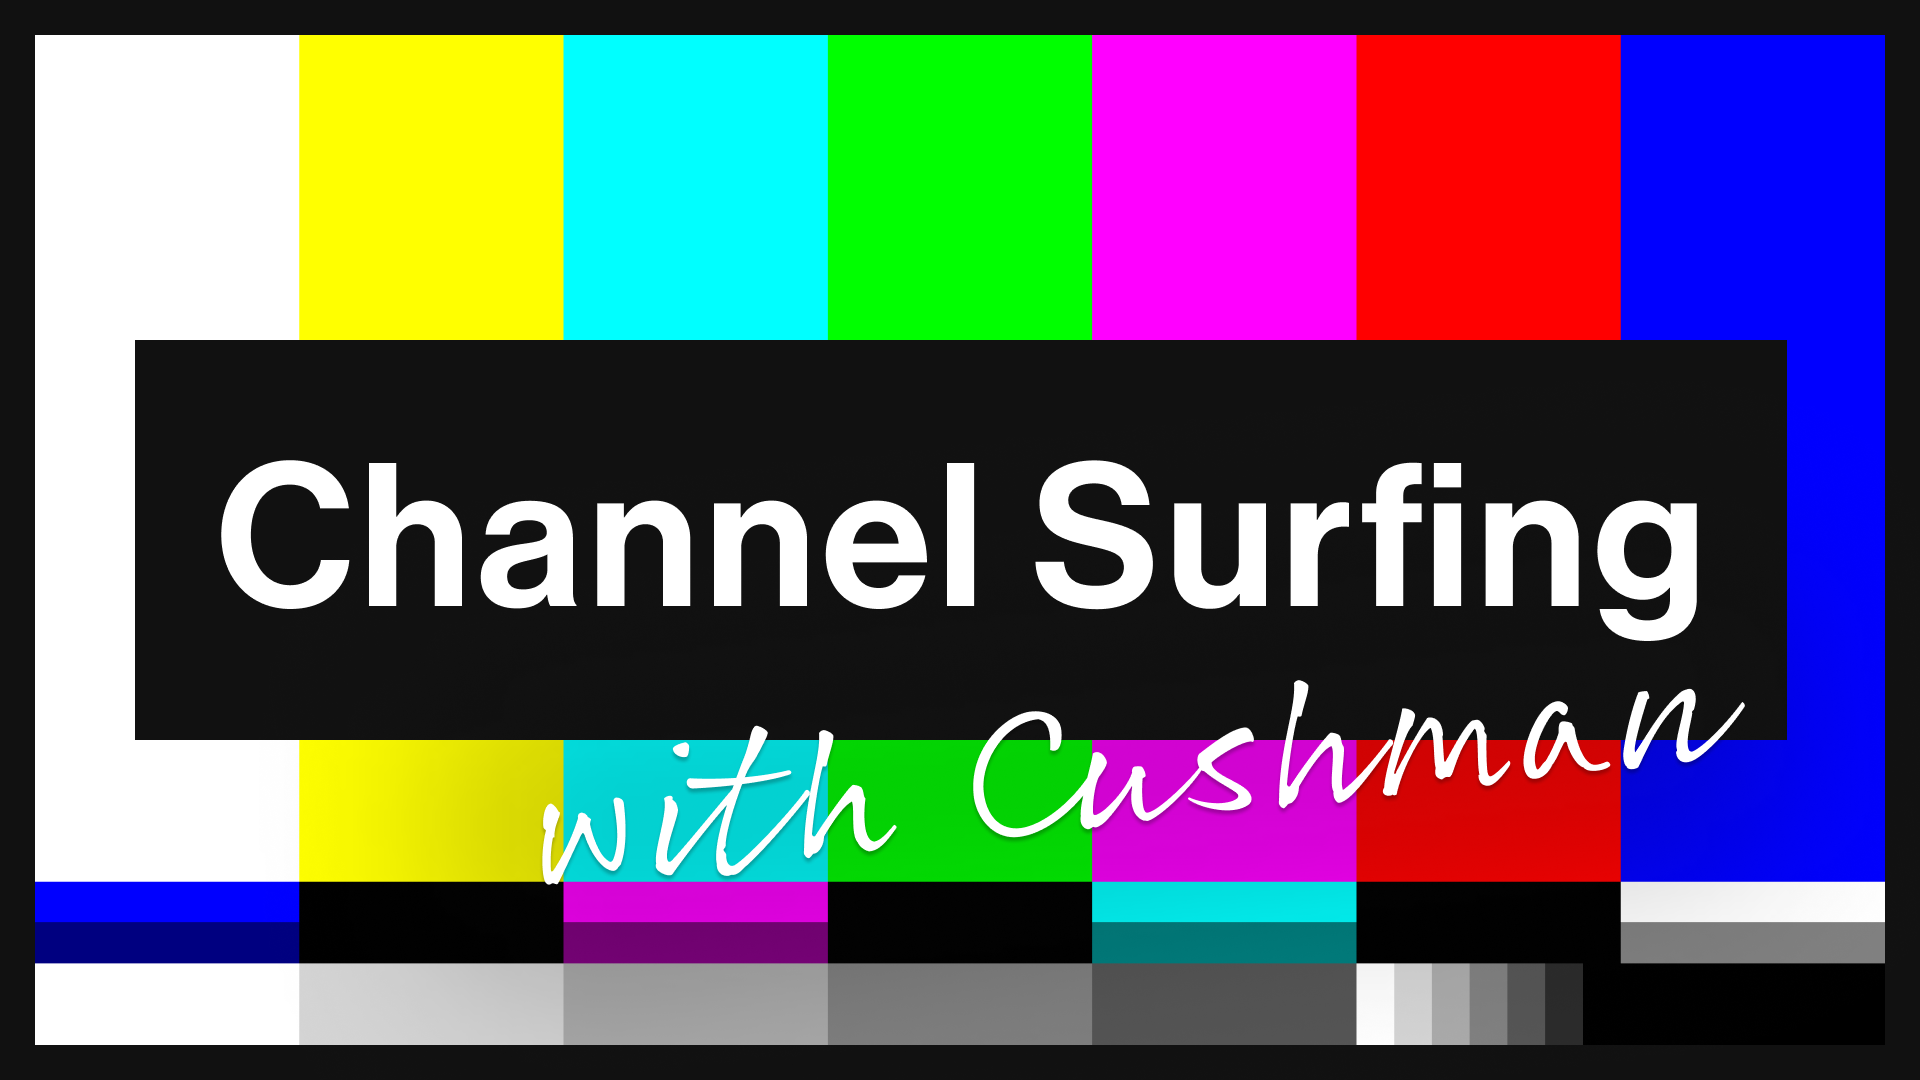 Channel Surfing with Cushman